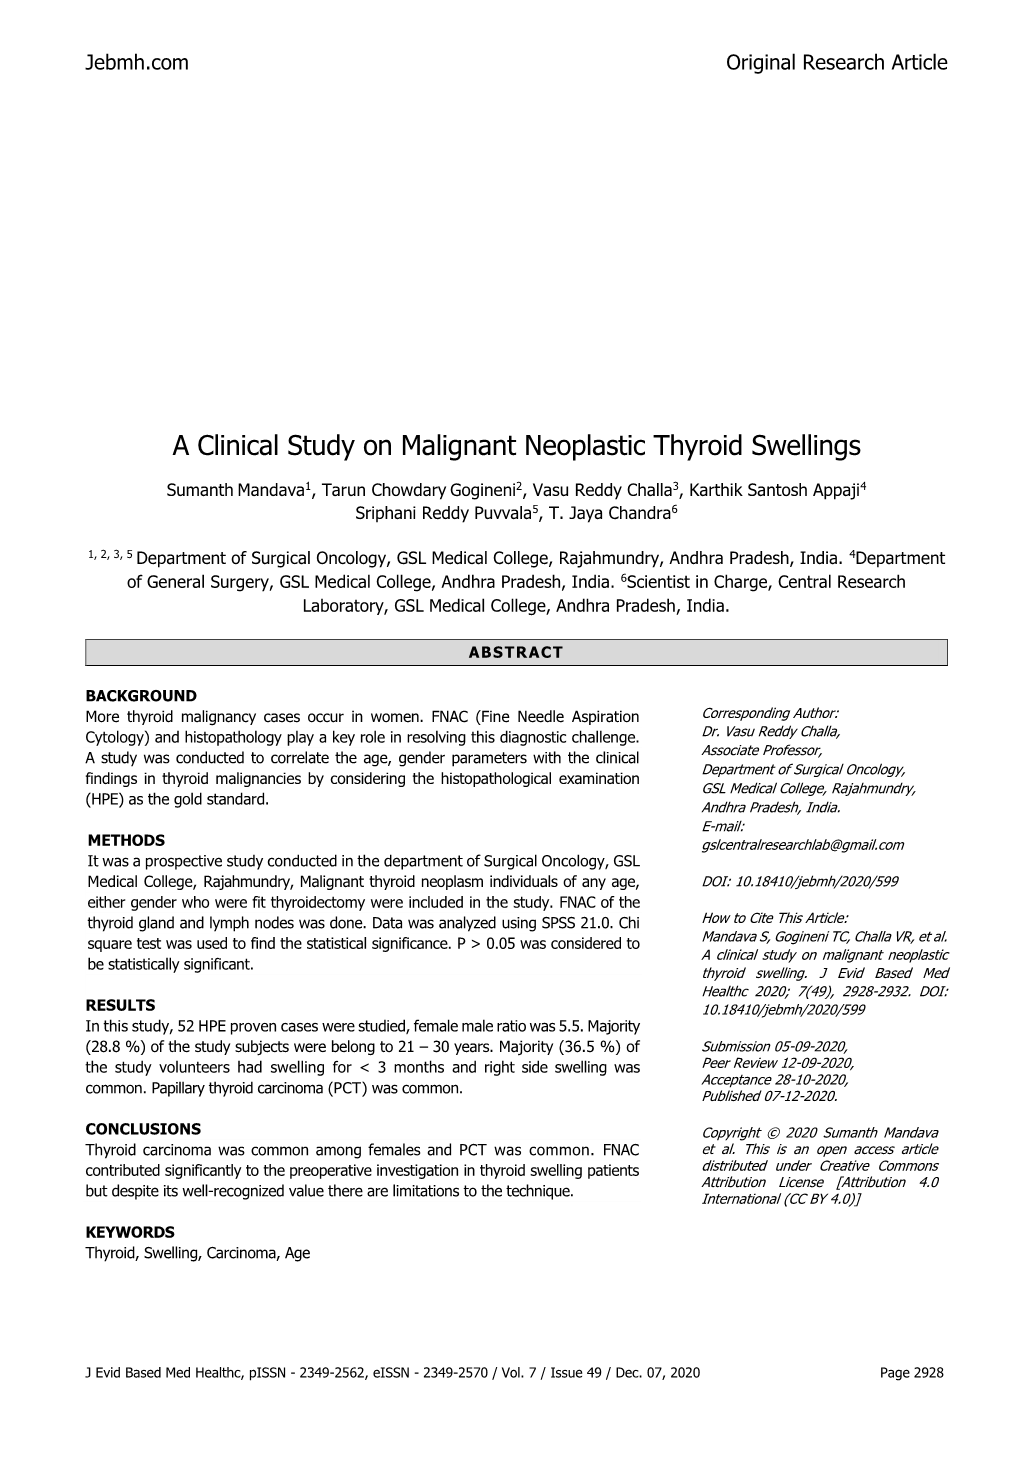 A Clinical Study on Malignant Neoplastic Thyroid Swellings